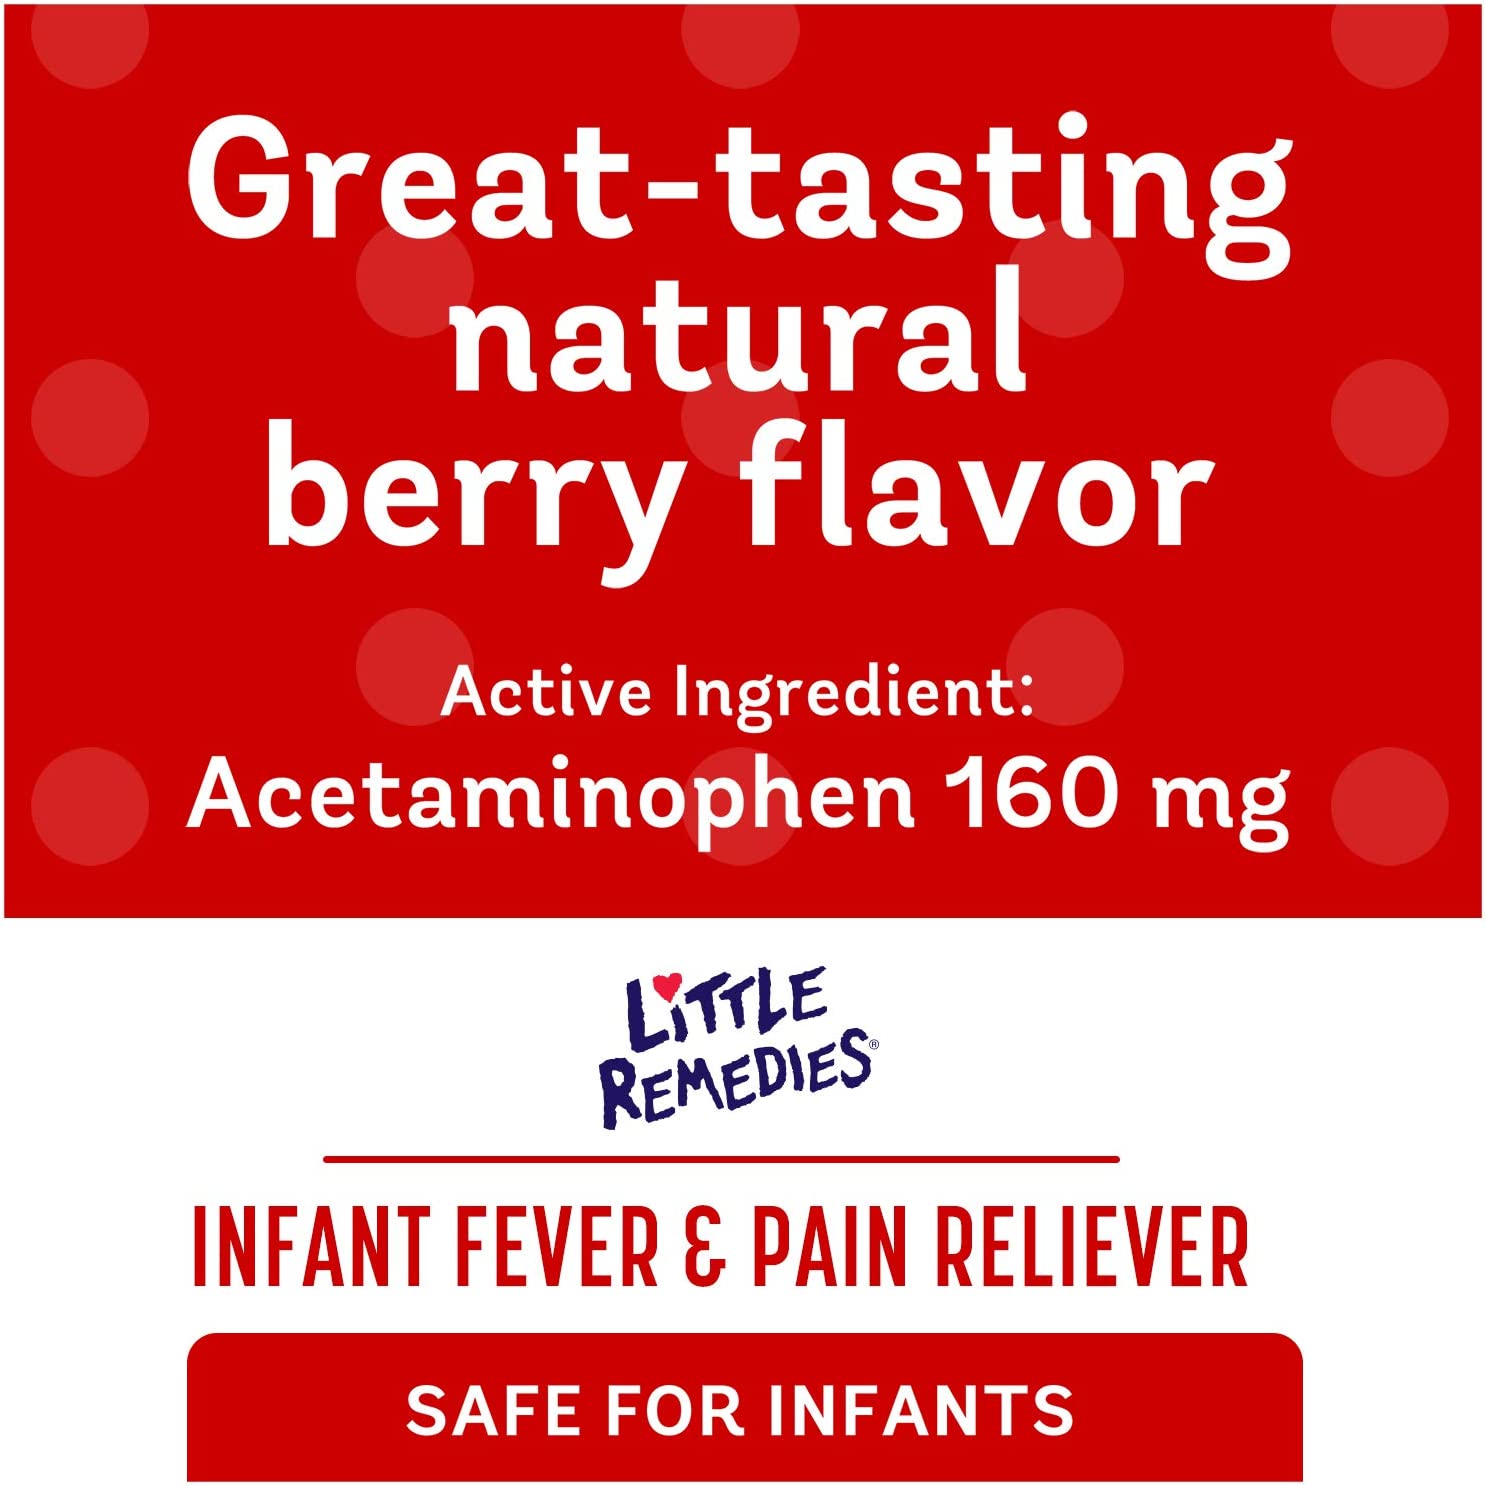 Little Remedies Infant Fever & Pain Reliever with Acetaminophen, Natural Berry, 2 Fl Oz - image 2 of 16